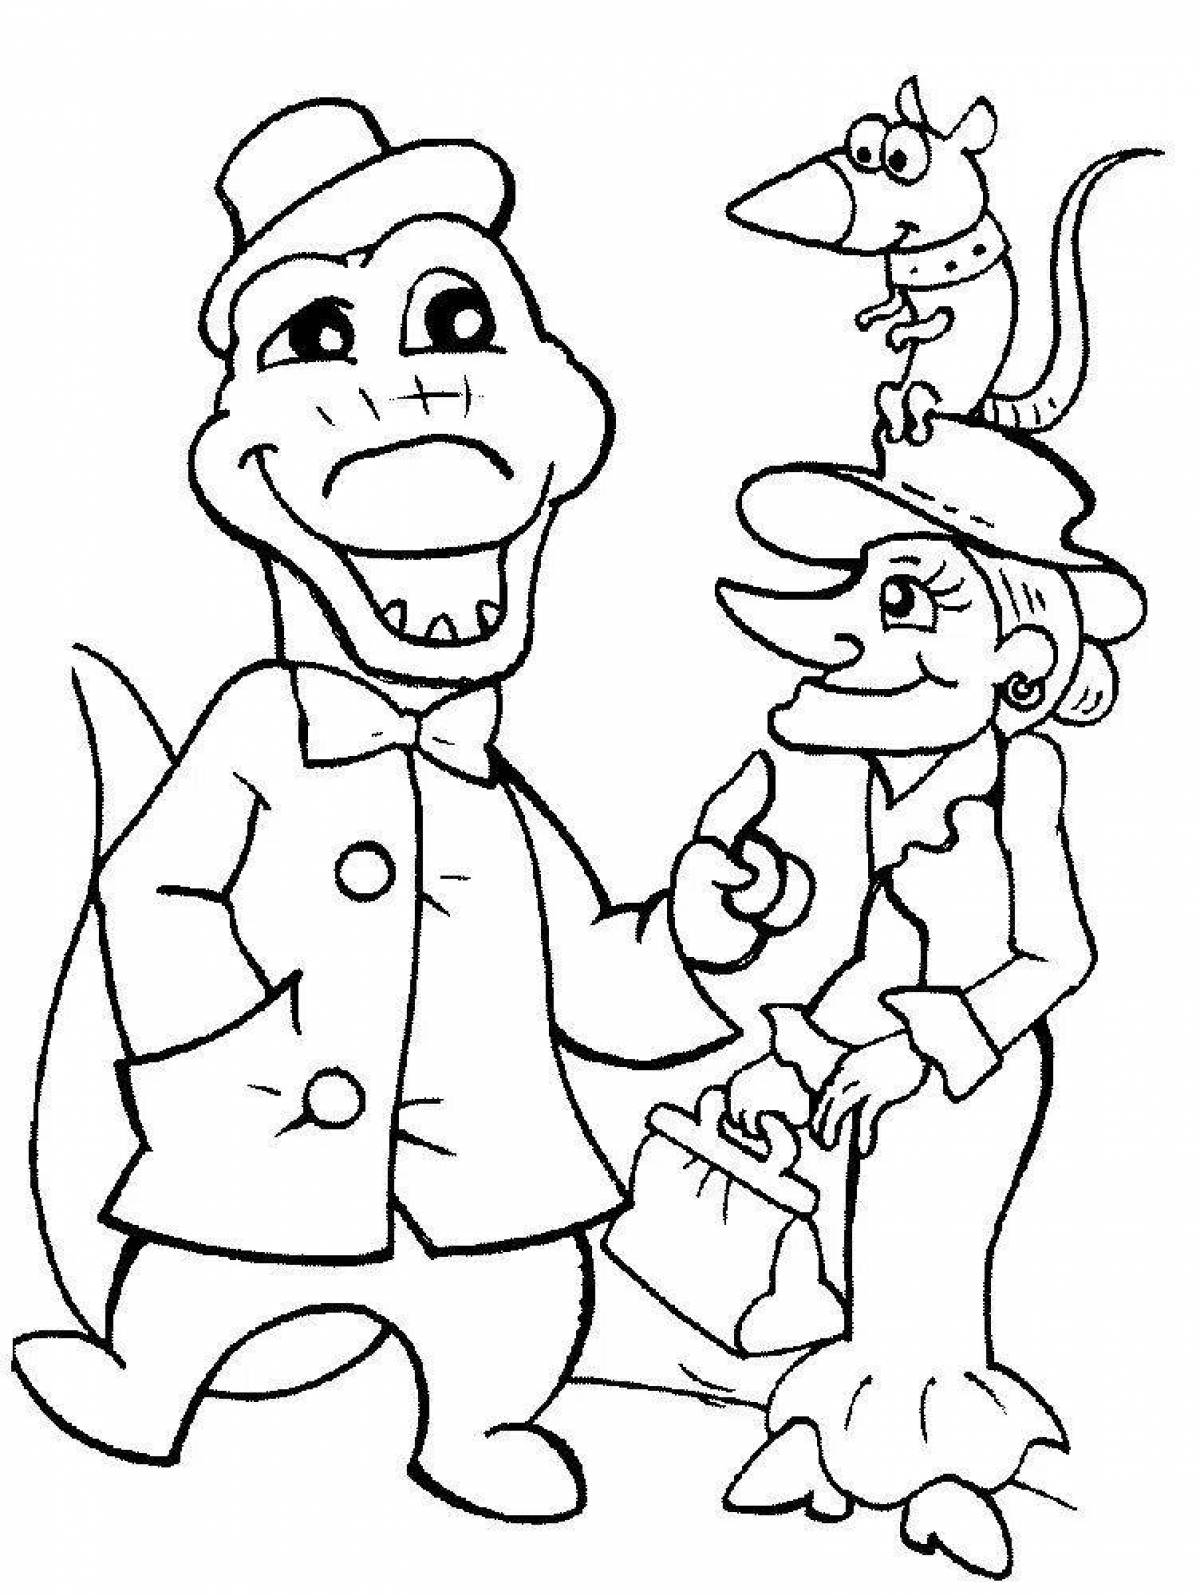 Colorful genie coloring page